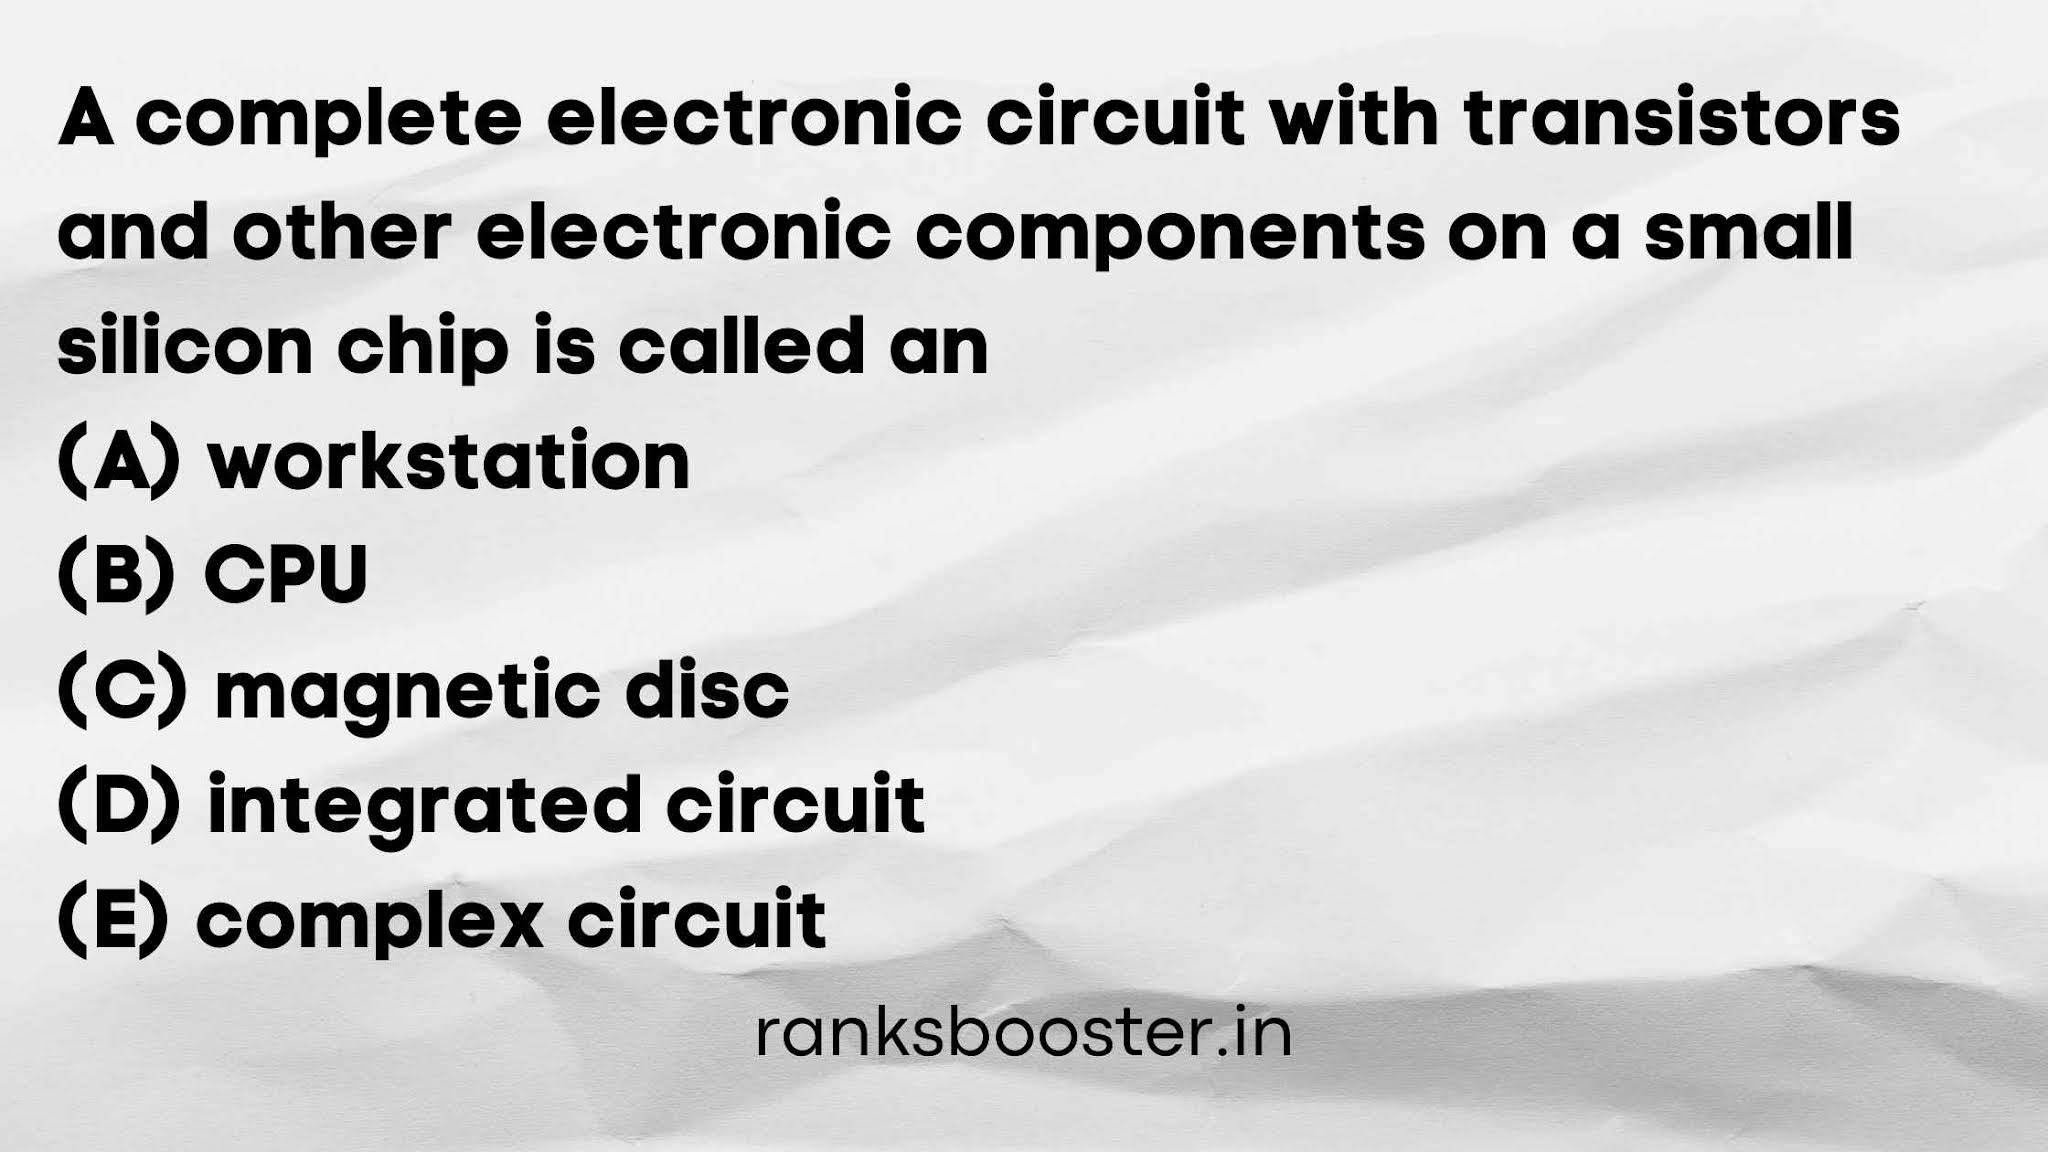 A complete electronic circuit with transistors and other electronic components on a small silicon chip is called an (A) workstation (B) CPU (C) magnetic disc (D) integrated circuit (E) complex circuit